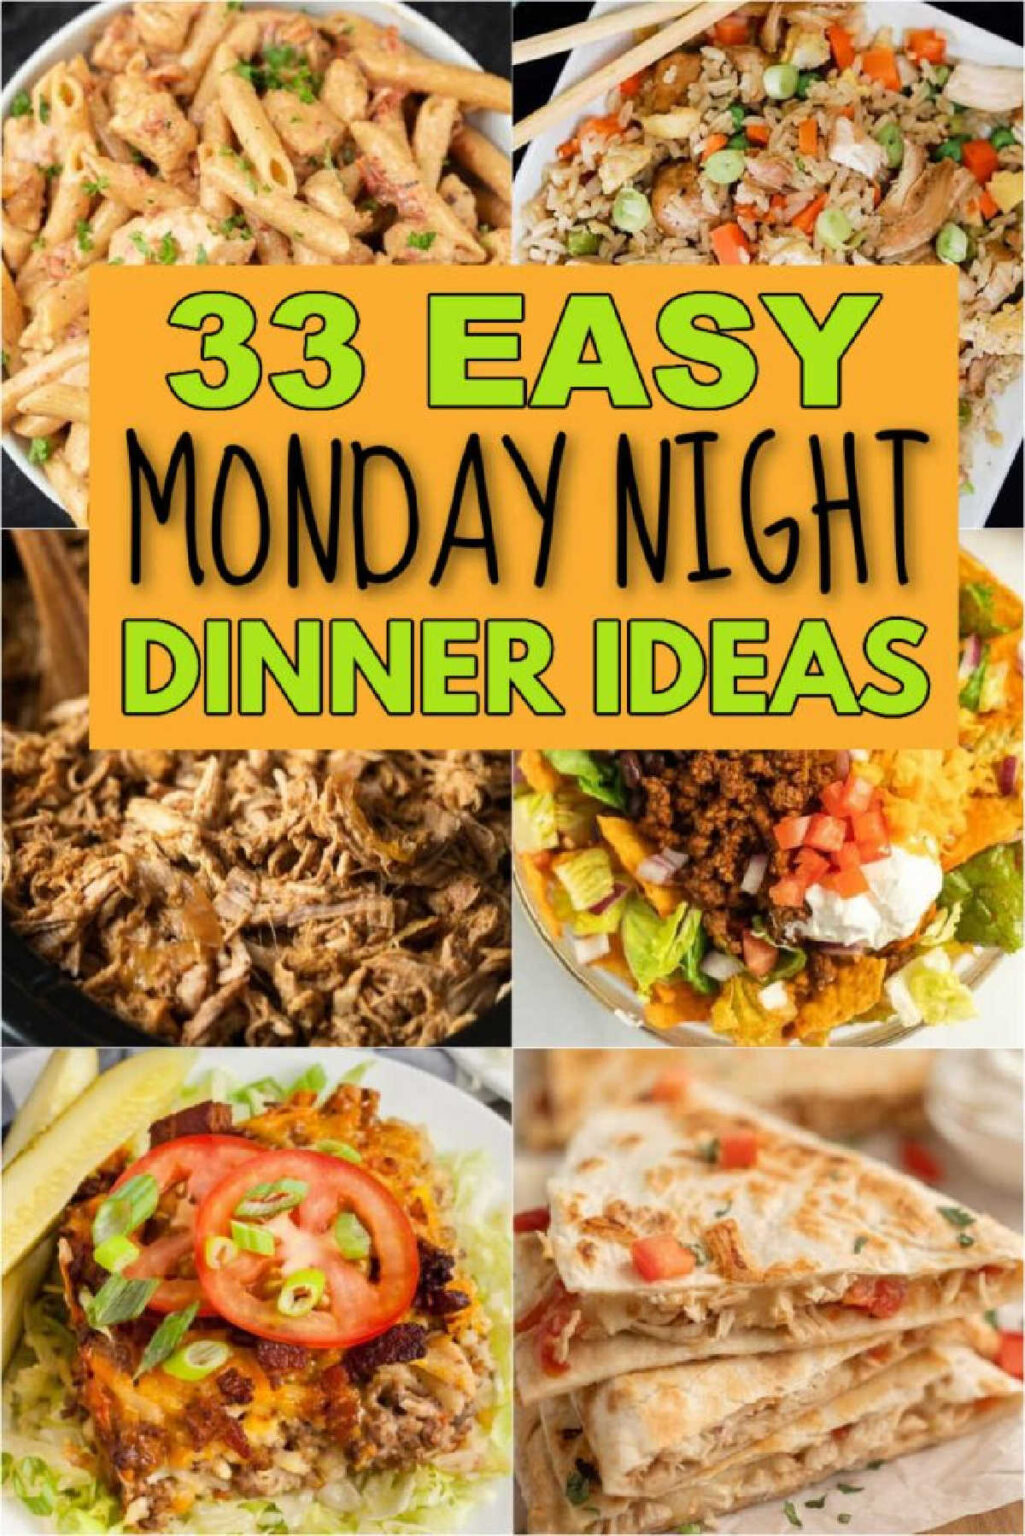 Monday night dinner ideas - 33 Easy Must Try Recipes